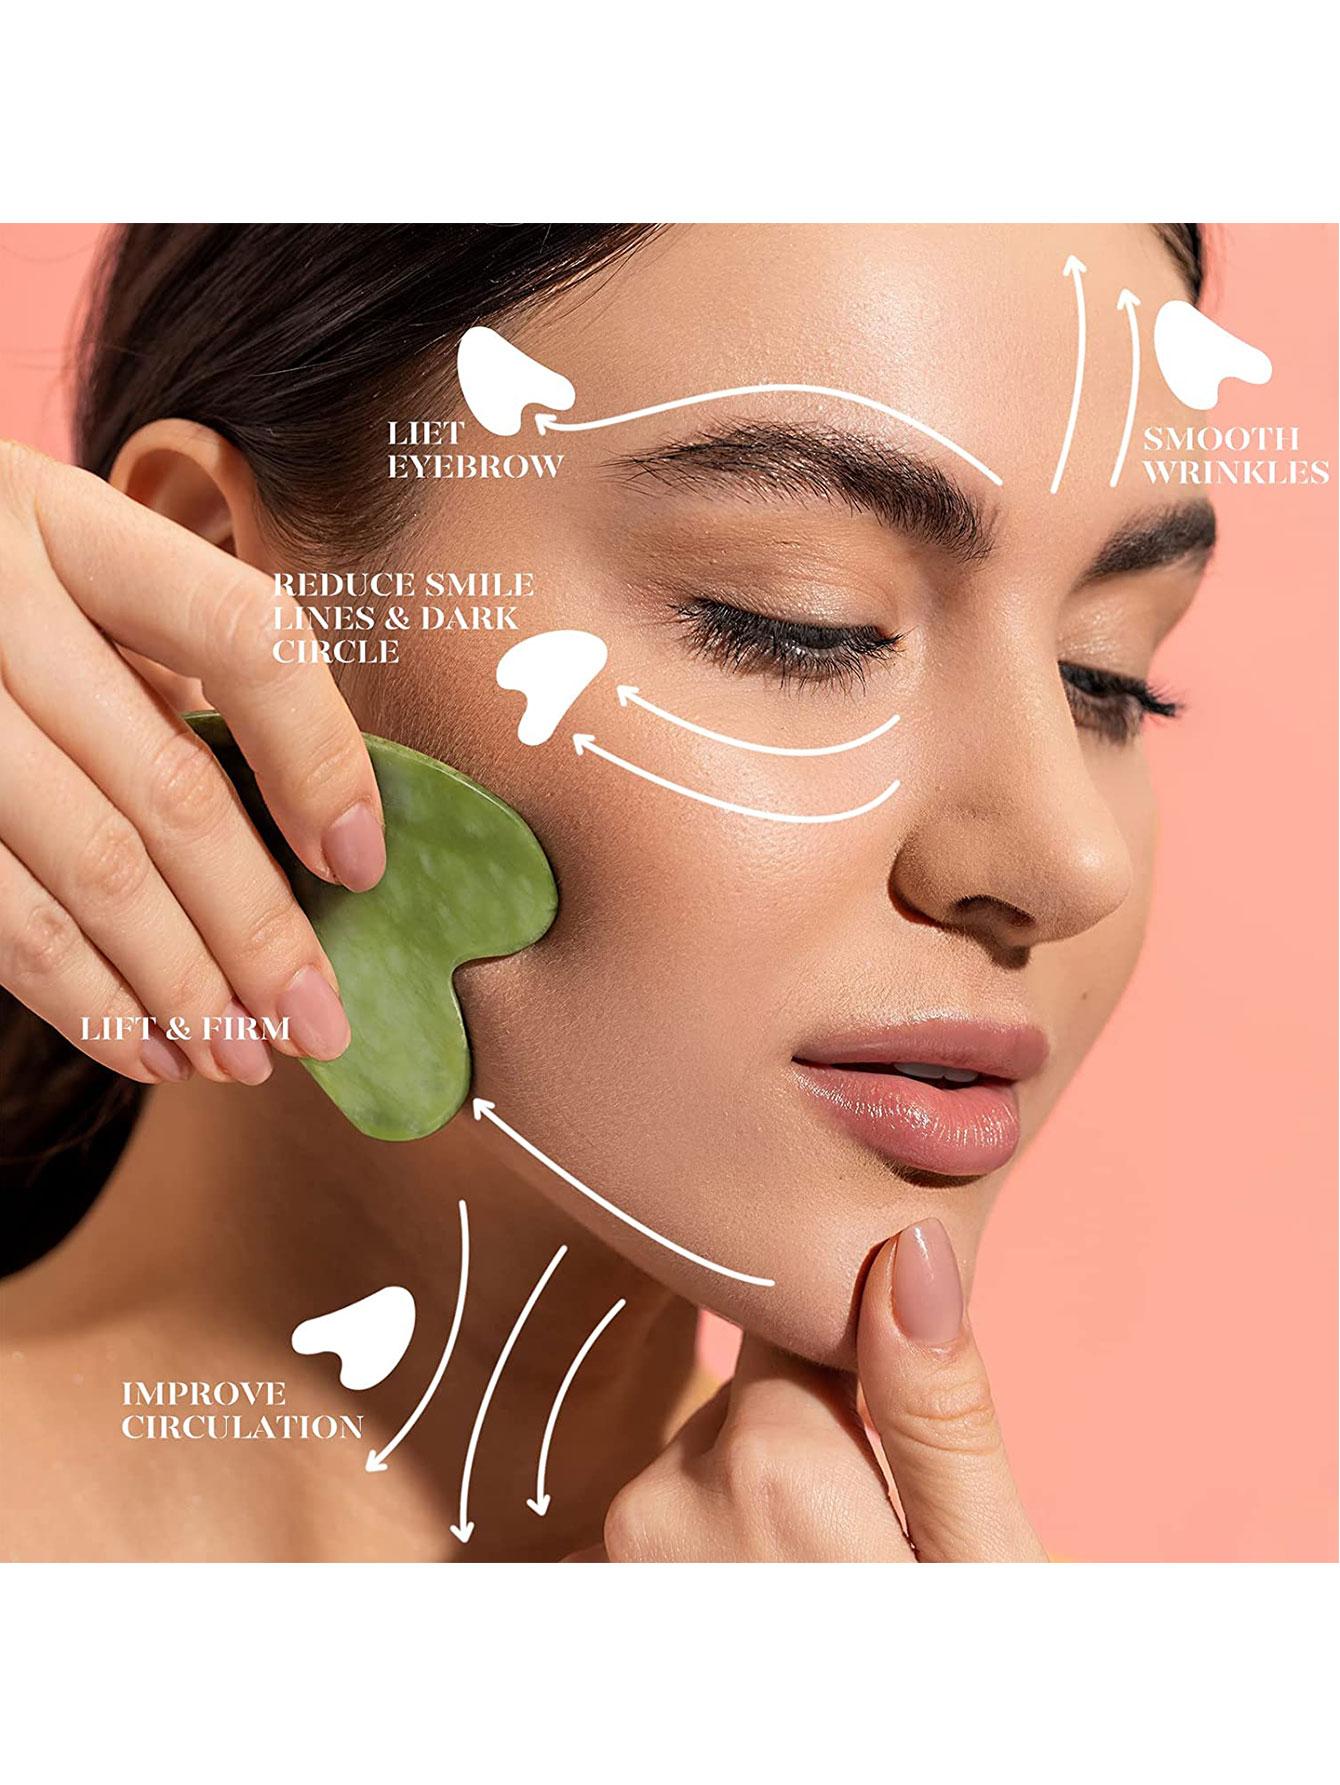 Facial Tool for Self Care, Massage Tool for Face and Body Treatment, Relieve Tensions and Reduce Puffiness